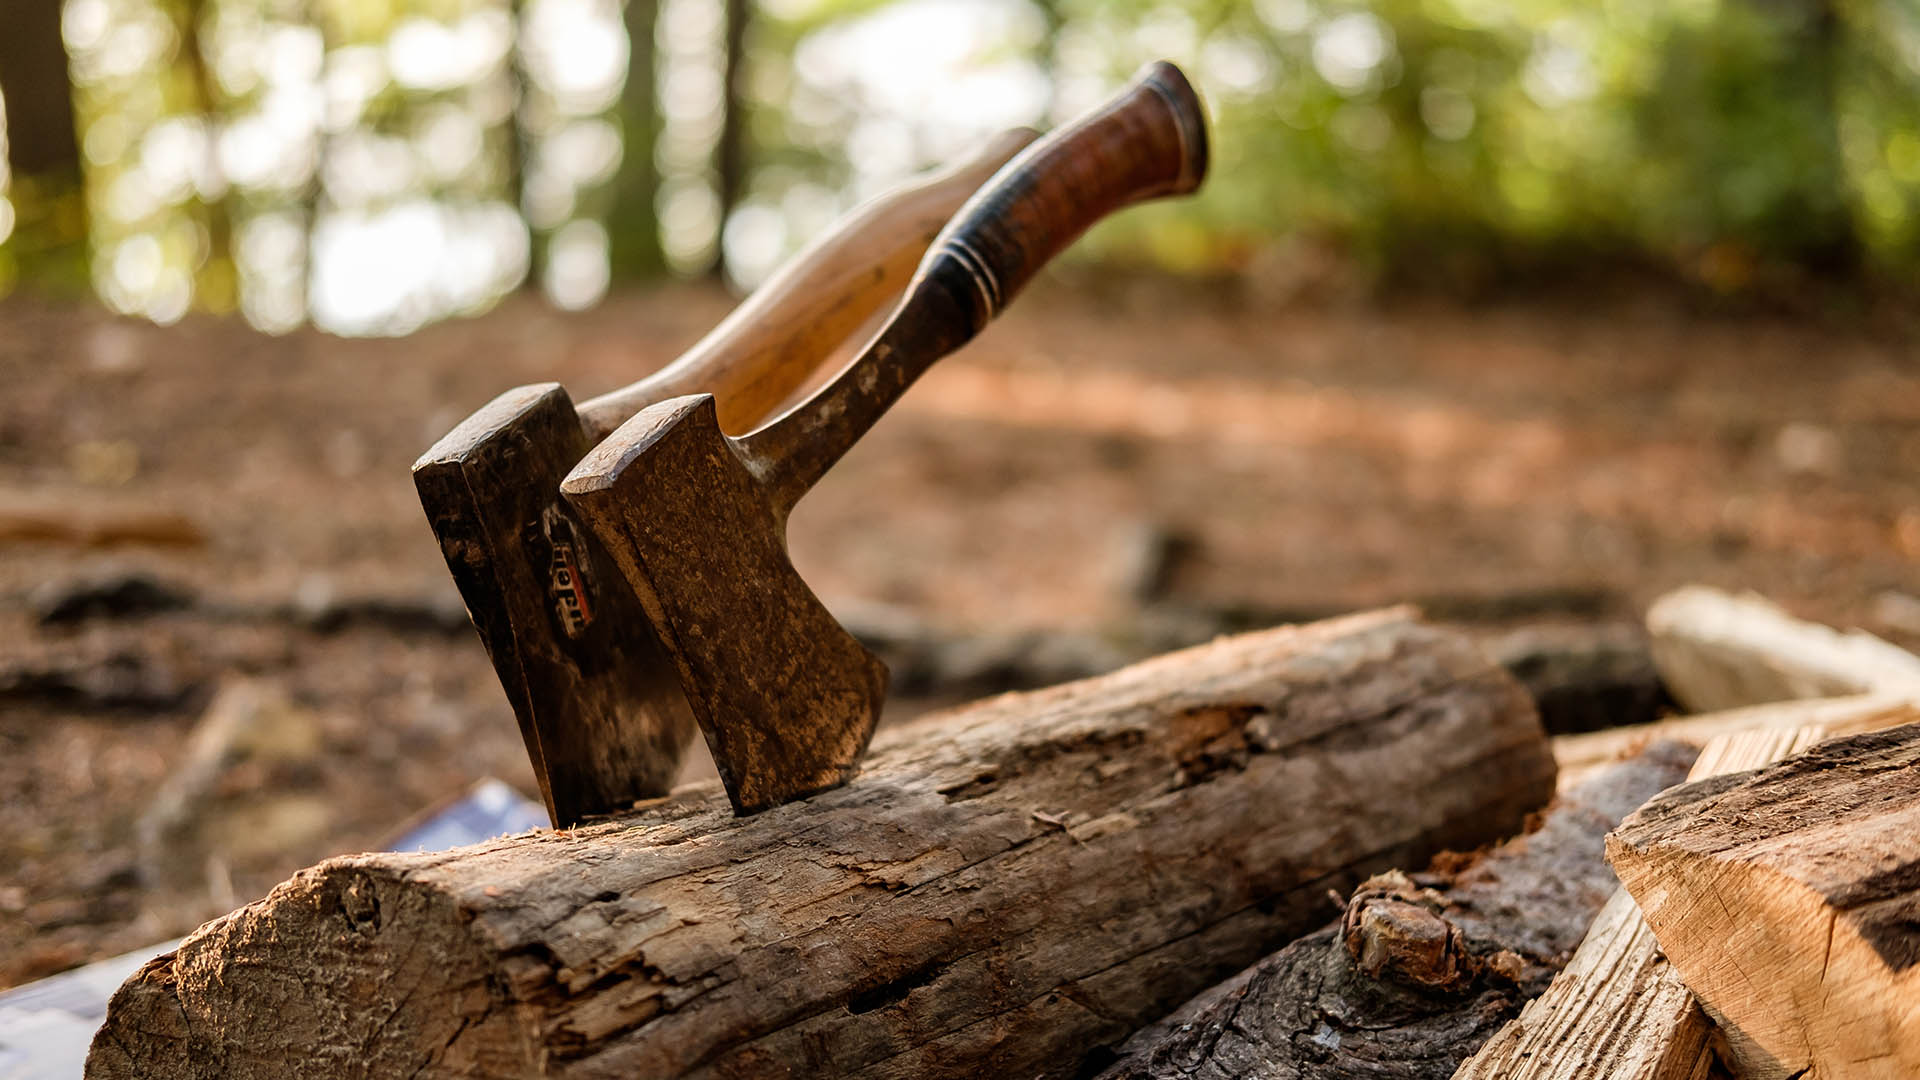 Two axes side by side in a log in a forest.